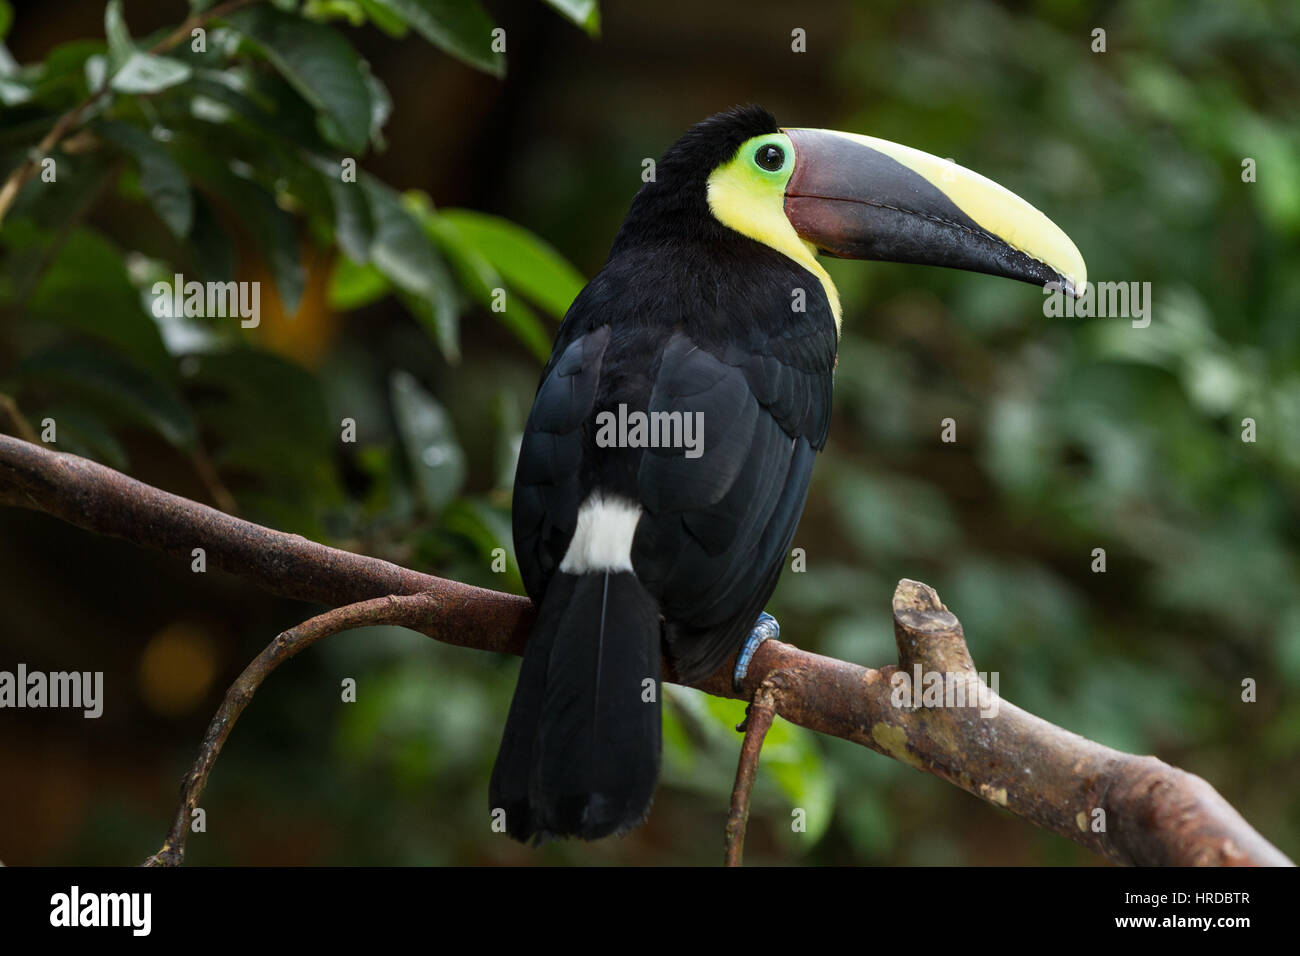 Chestnut-mandibled Toucan or Swainson's Toucan, Ramphastos ambiguus swainsonii, is found from Honduras to Colombia and Ecuador.  Photographed in Costa Stock Photo